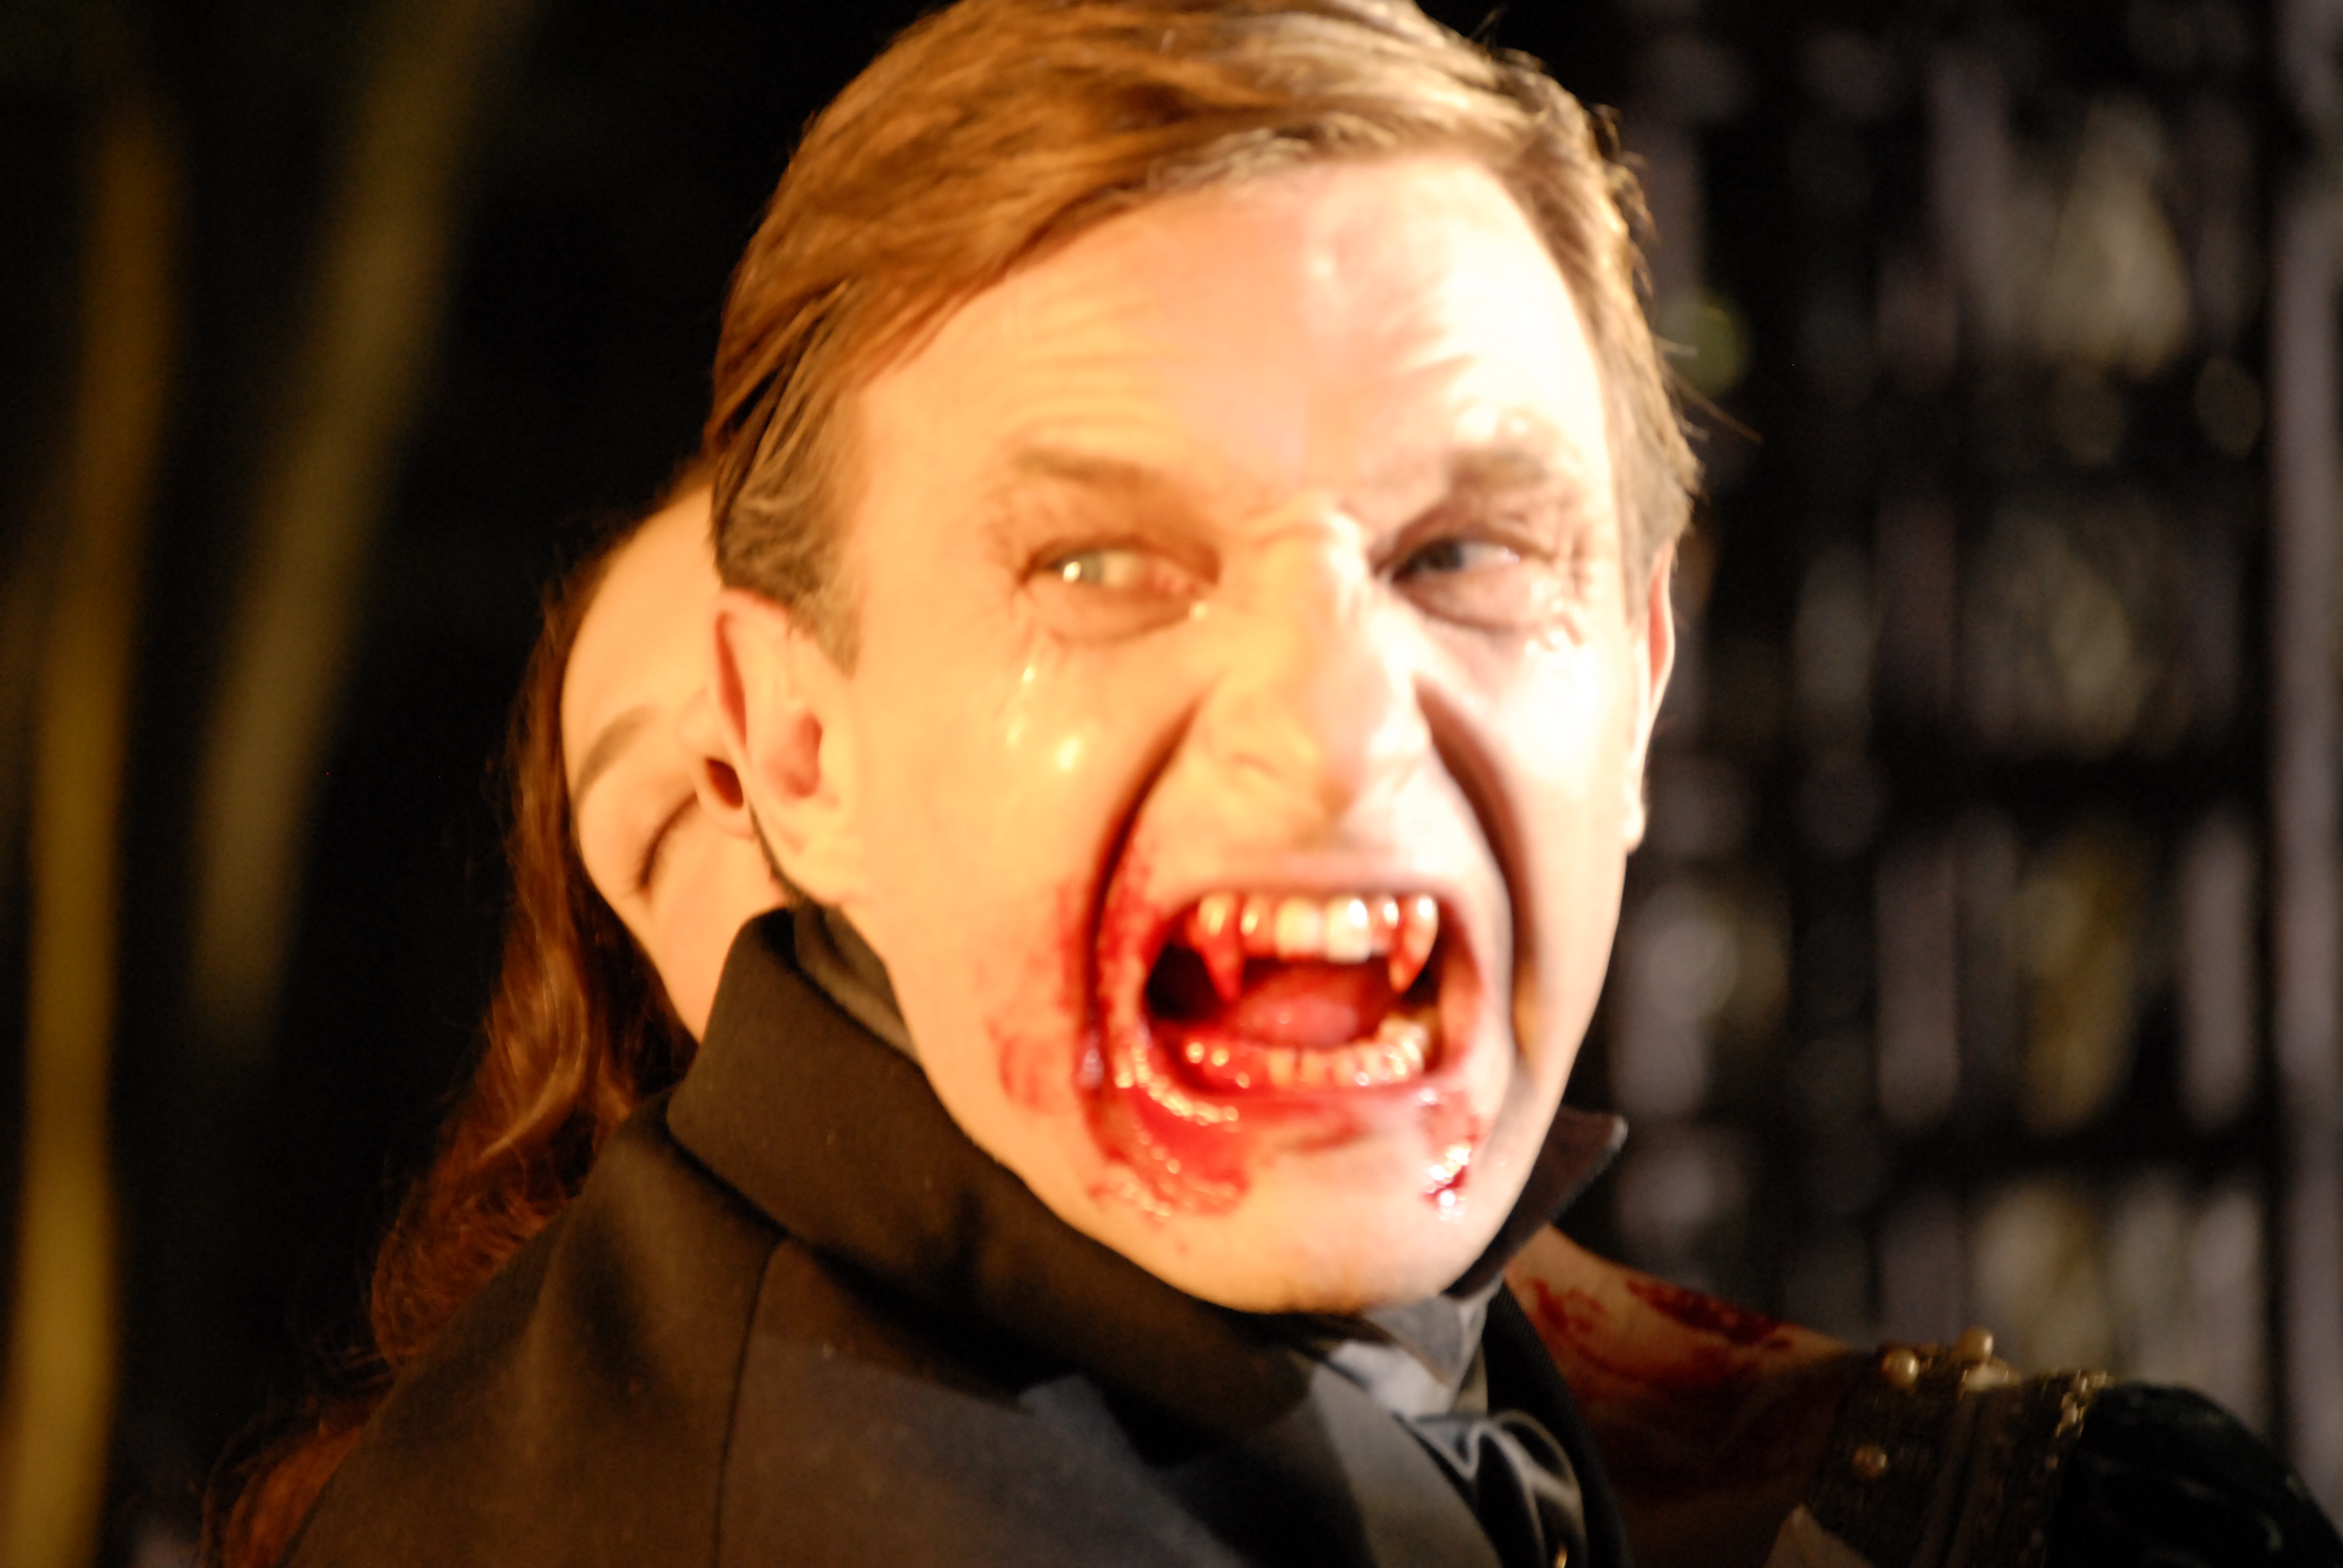 10. THOMAS KRETSCHMANN HAS A THIRST FOR BLOOD IN ARGENTO'S DRACULA 3D